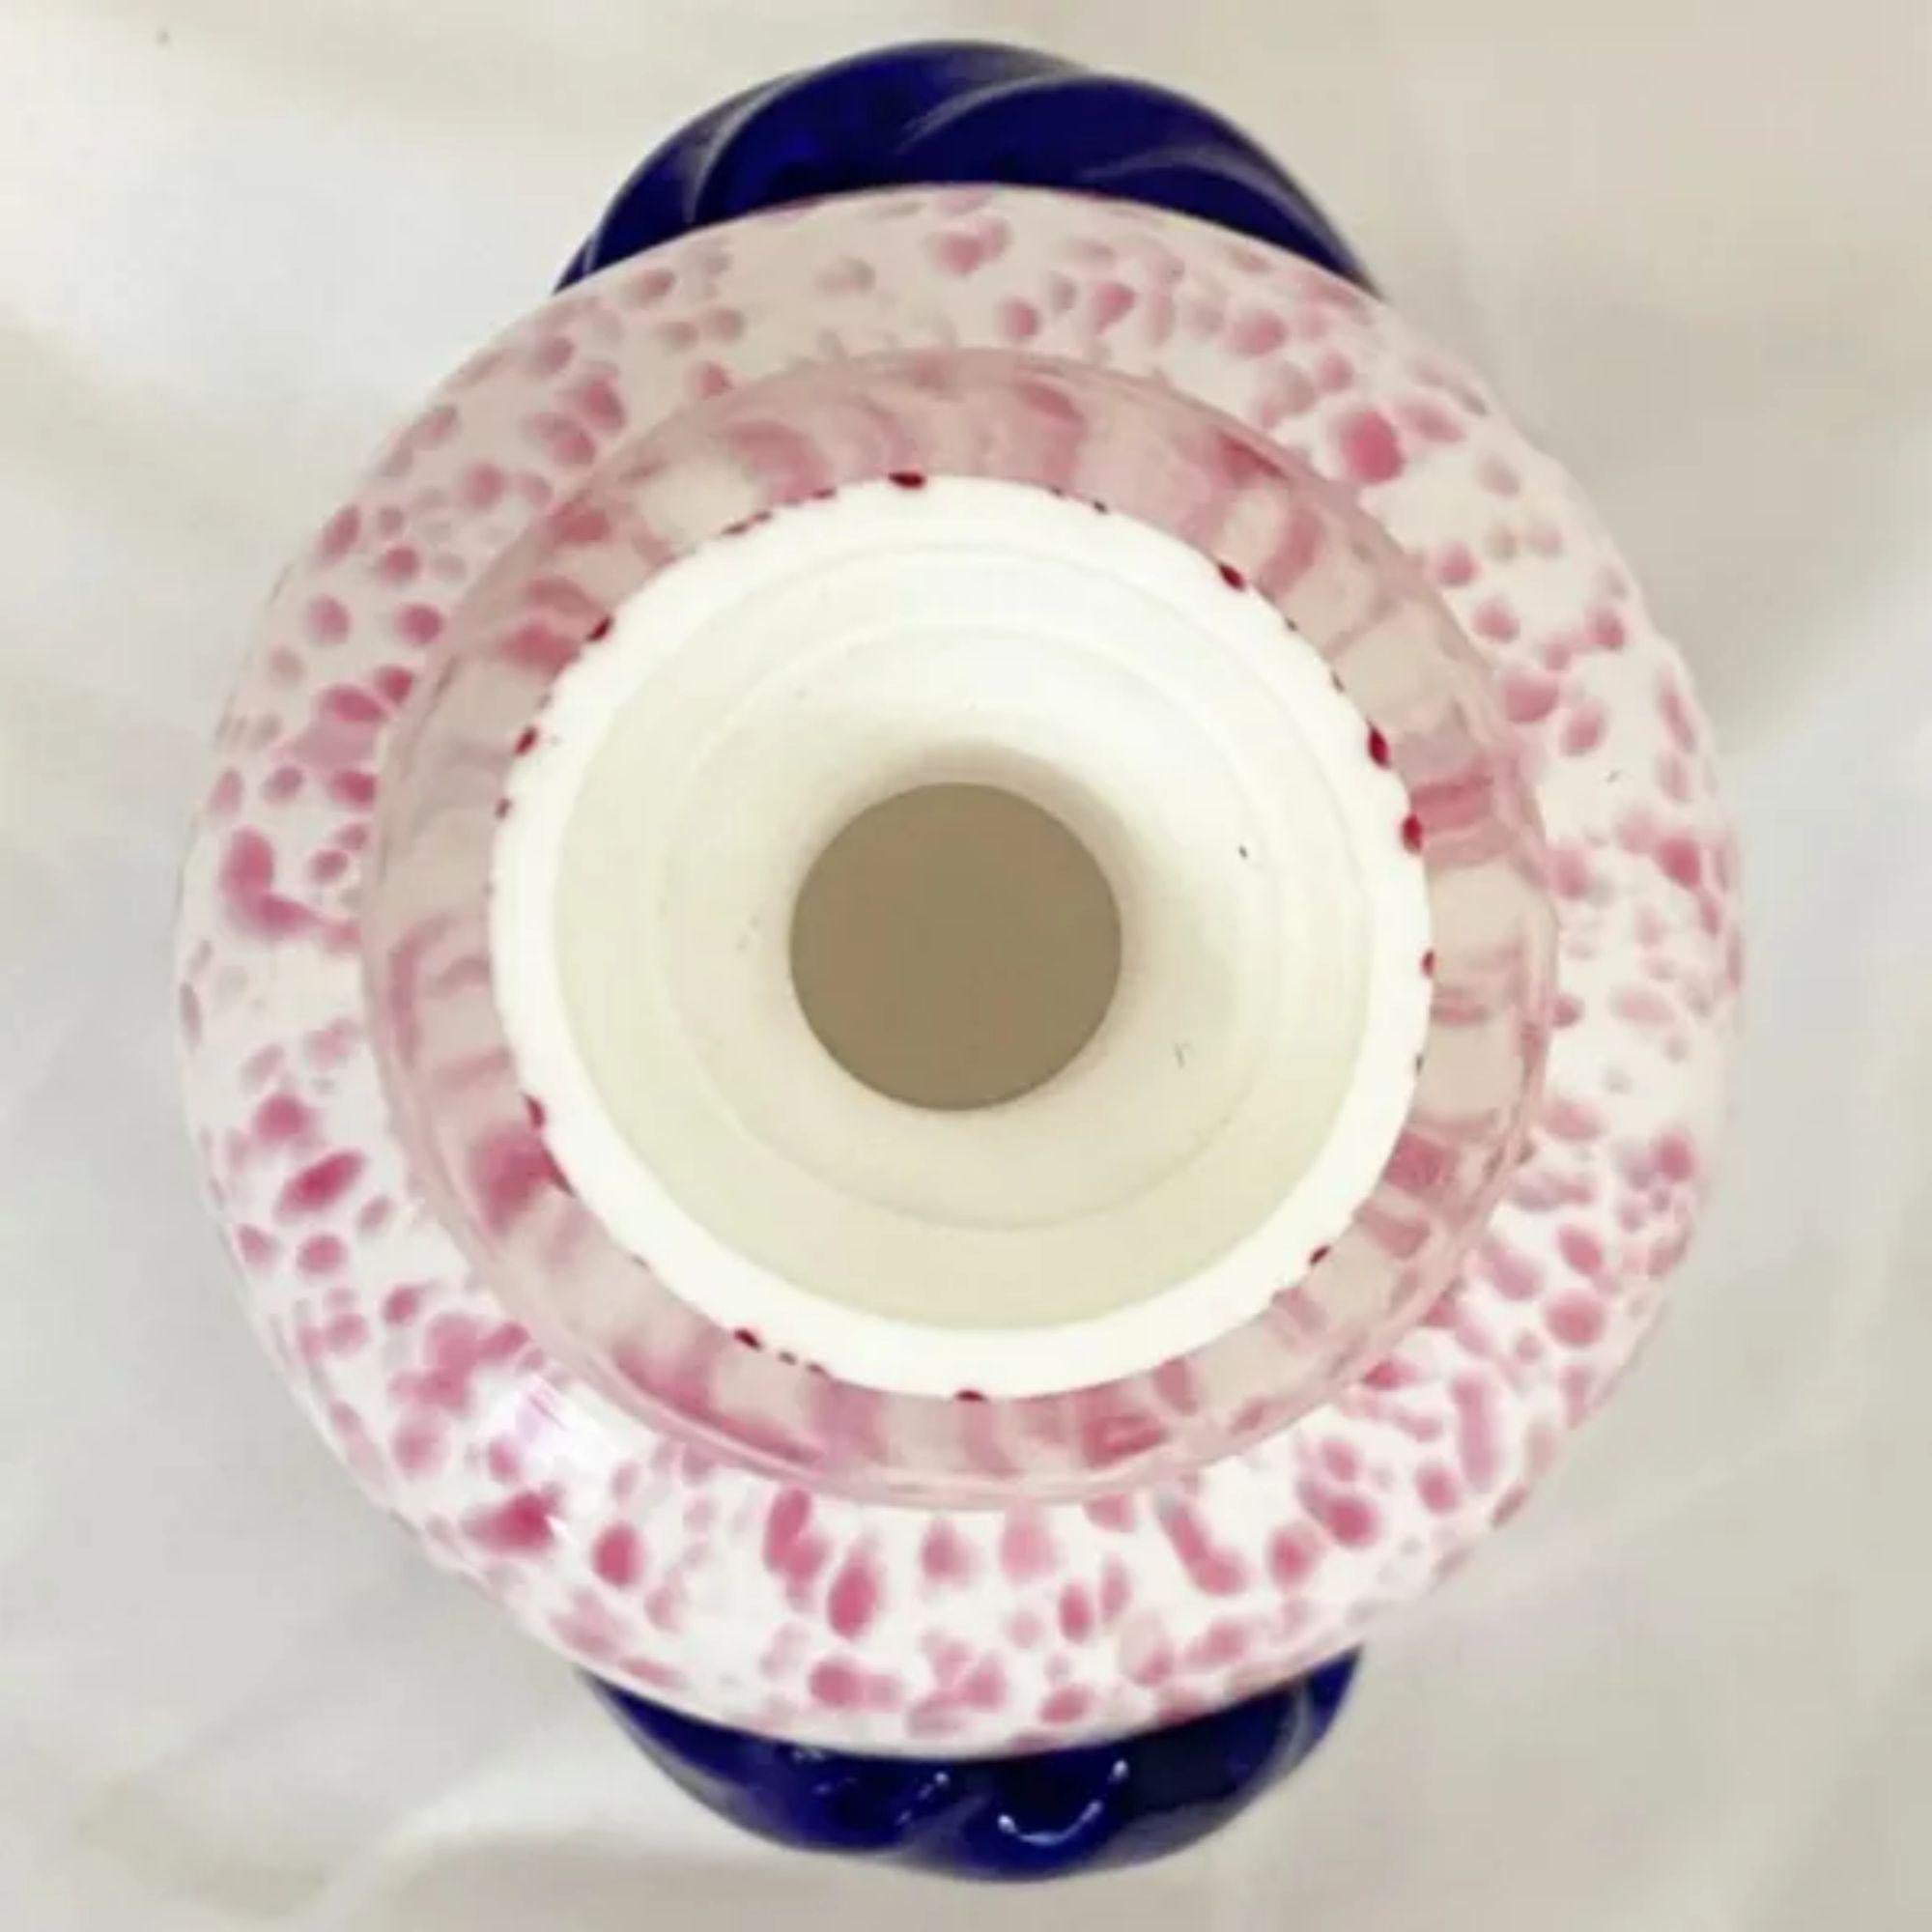 Italian White and Pink Glass Vase with Blue Snaking Swirl